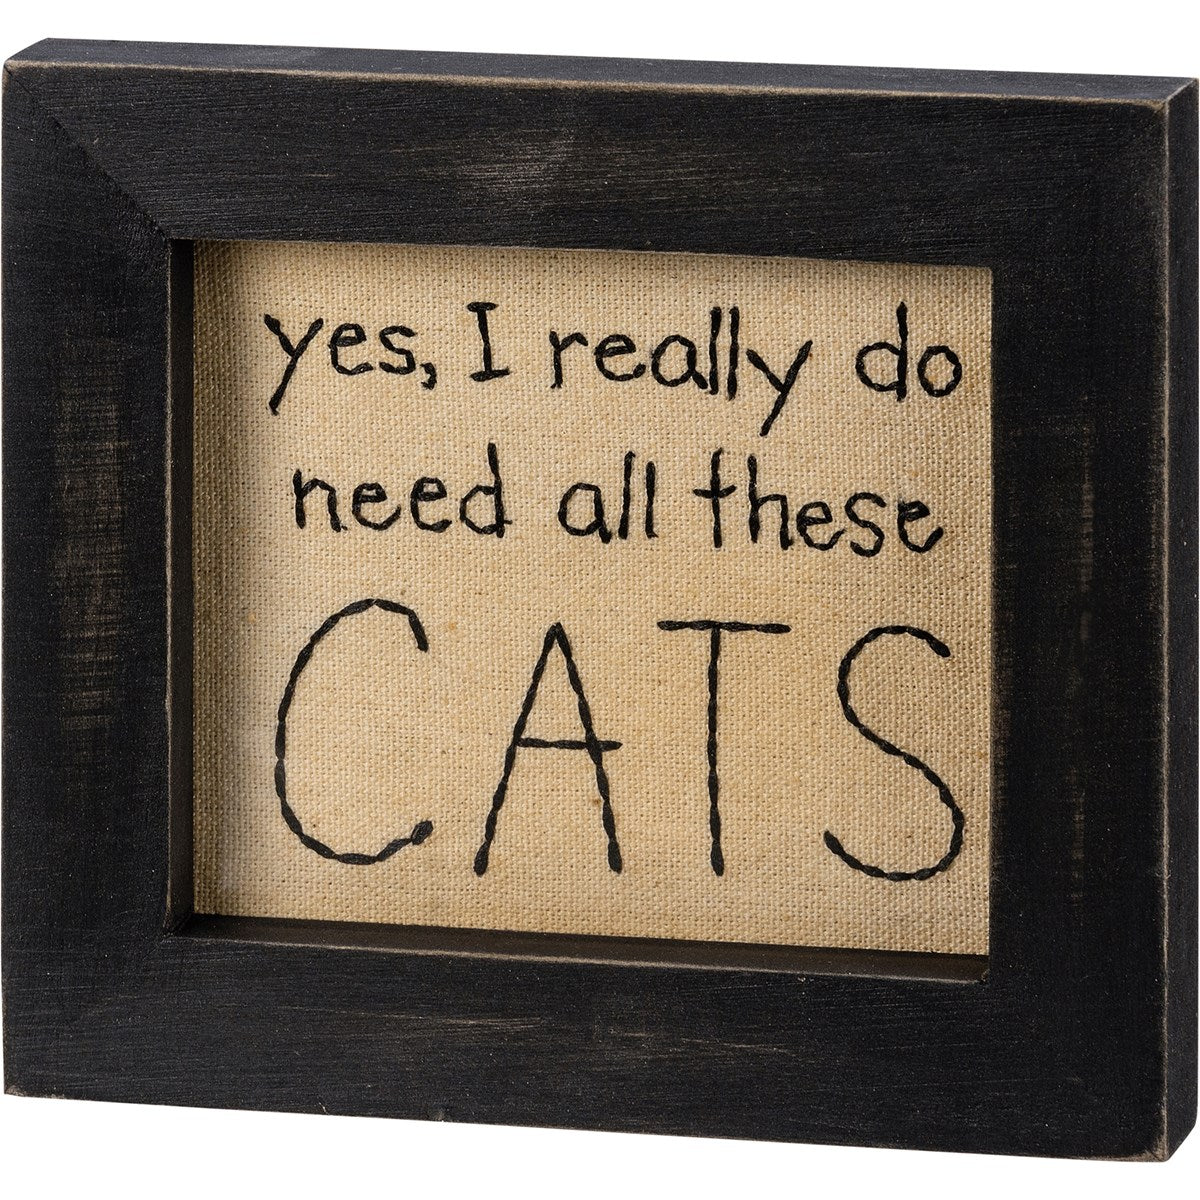 All These Cats - Stitchery